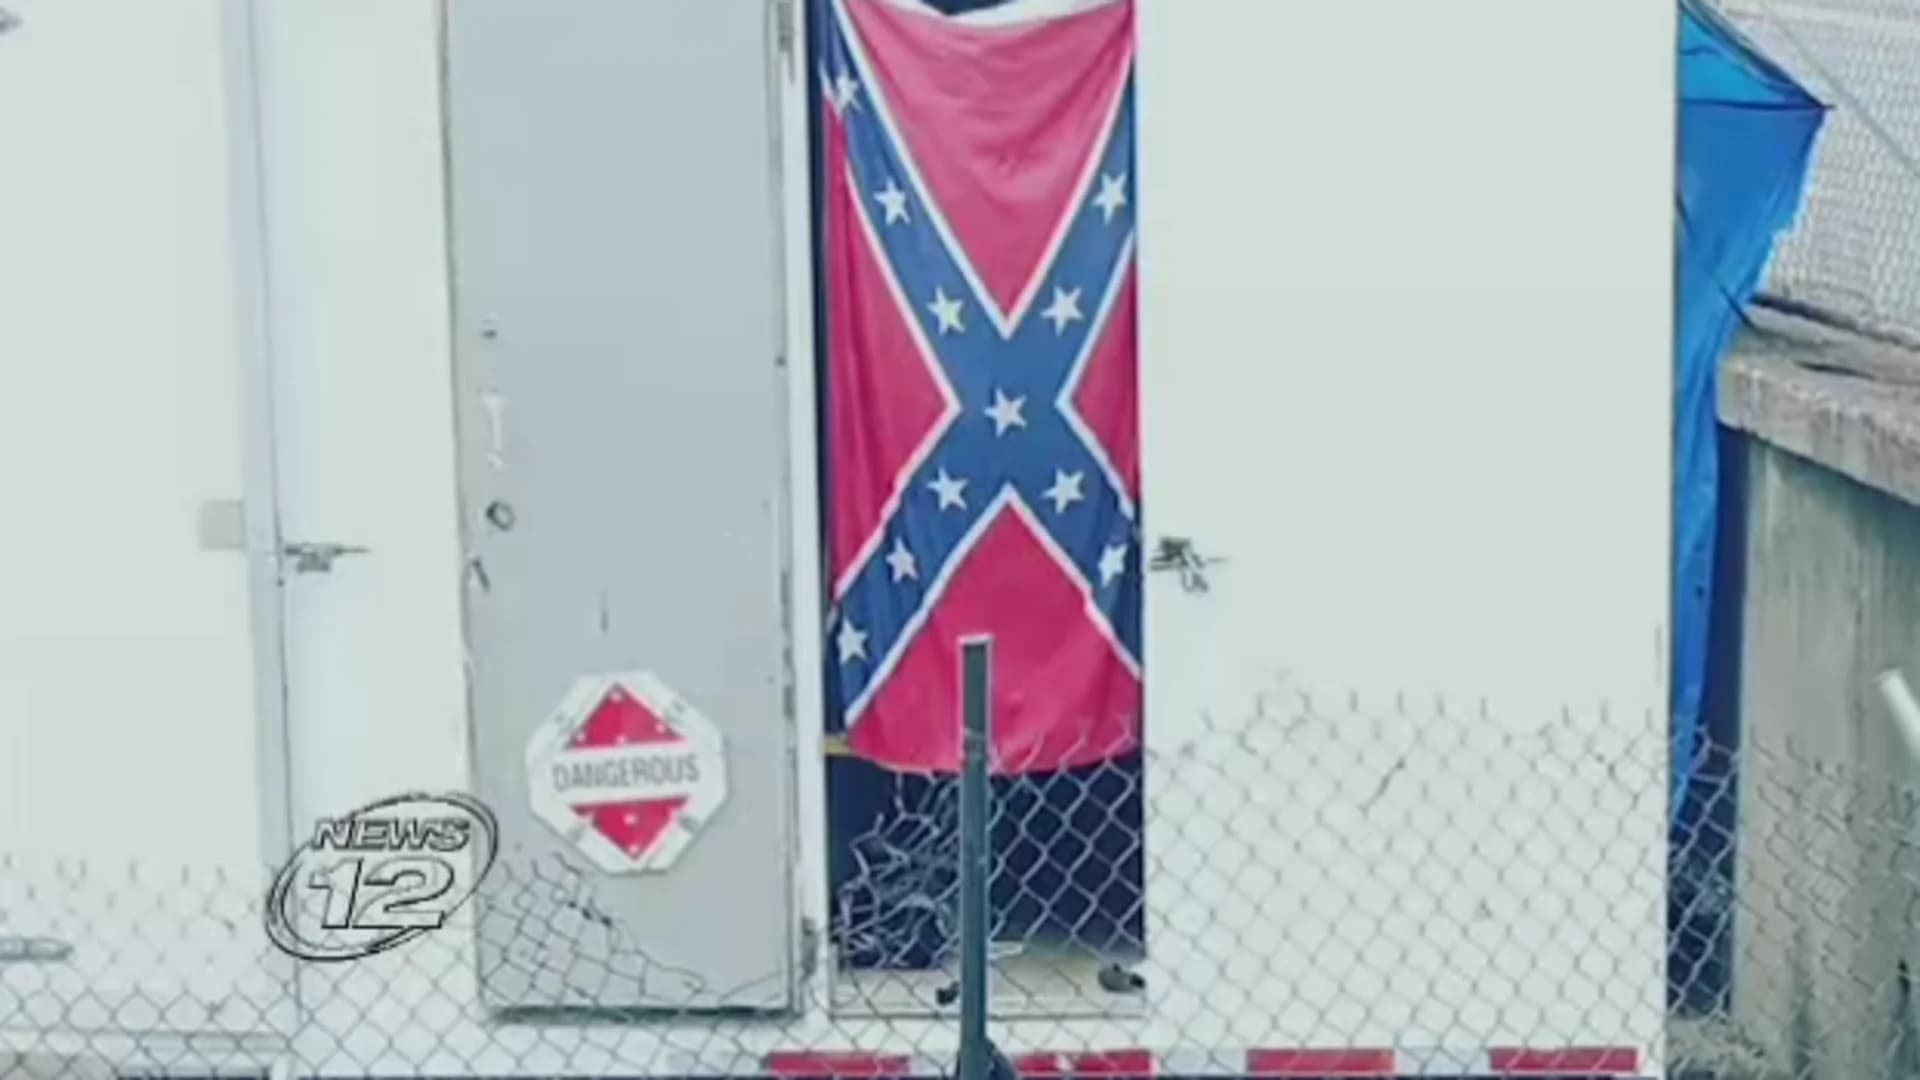 Yonkers residents upset over Confederate flag found at carnival on Chicken Island